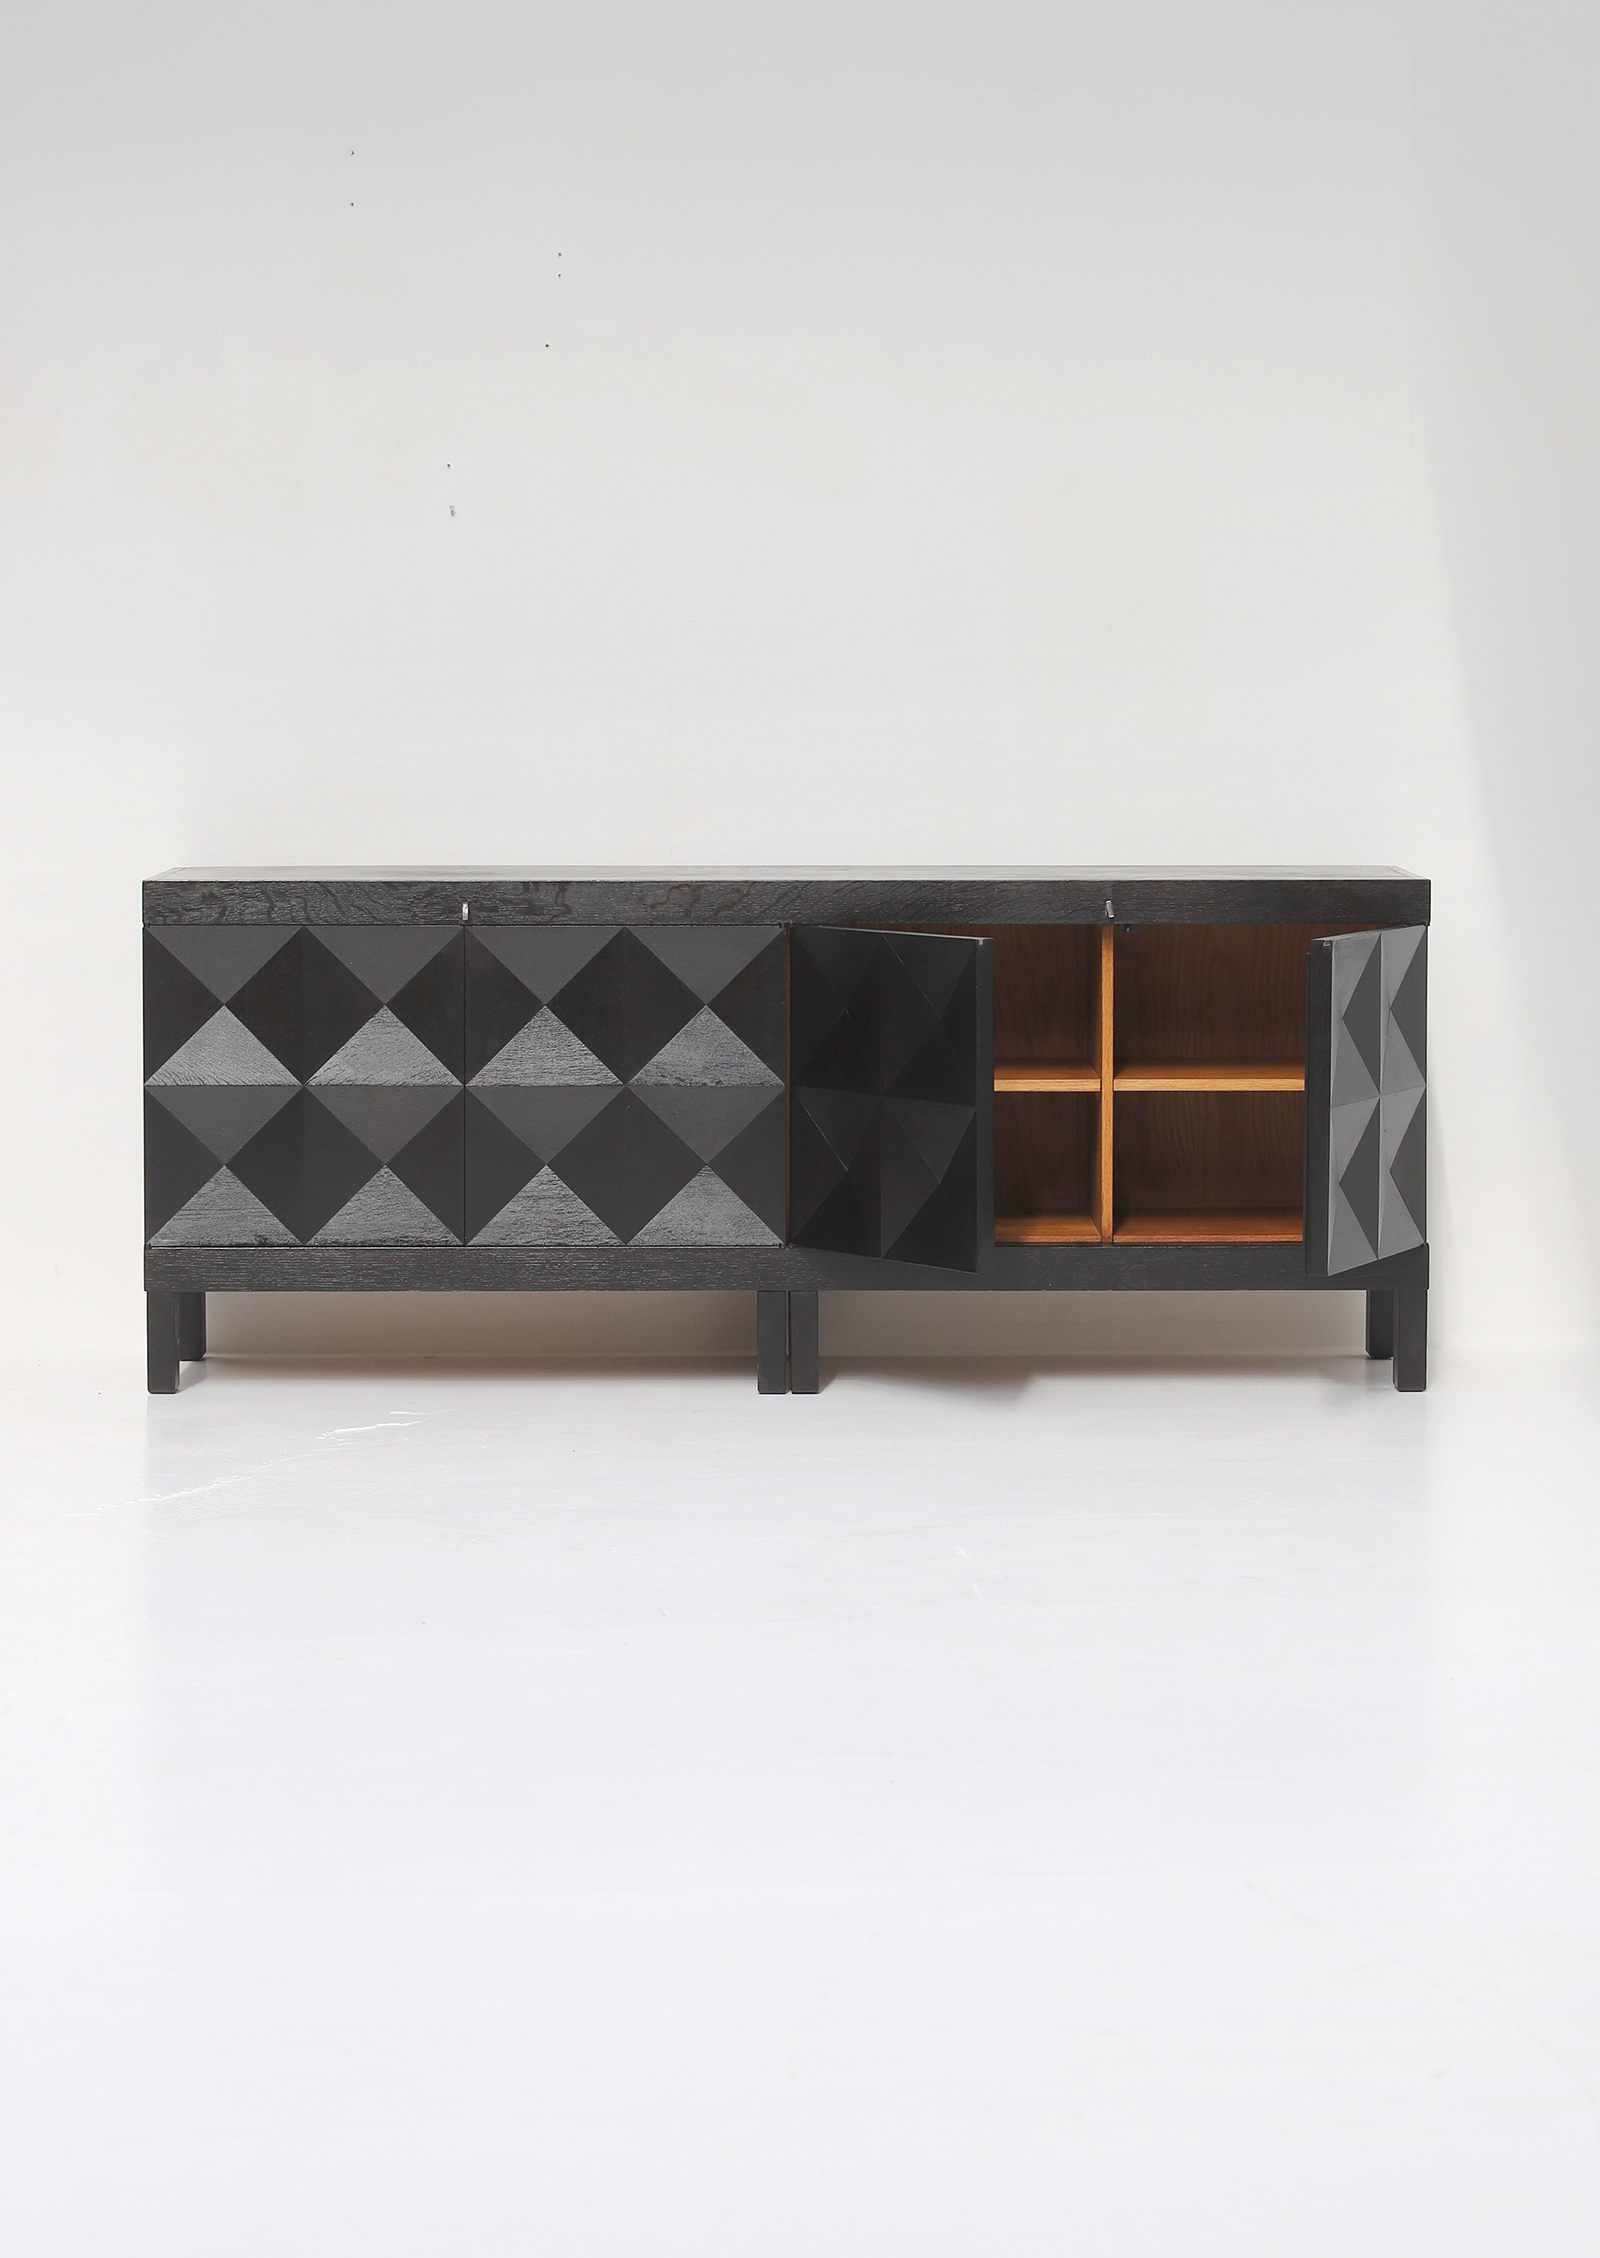 quality crafted sideboard with op-art doors designed by J. Batenburg for MI, Belgium 1969image 6